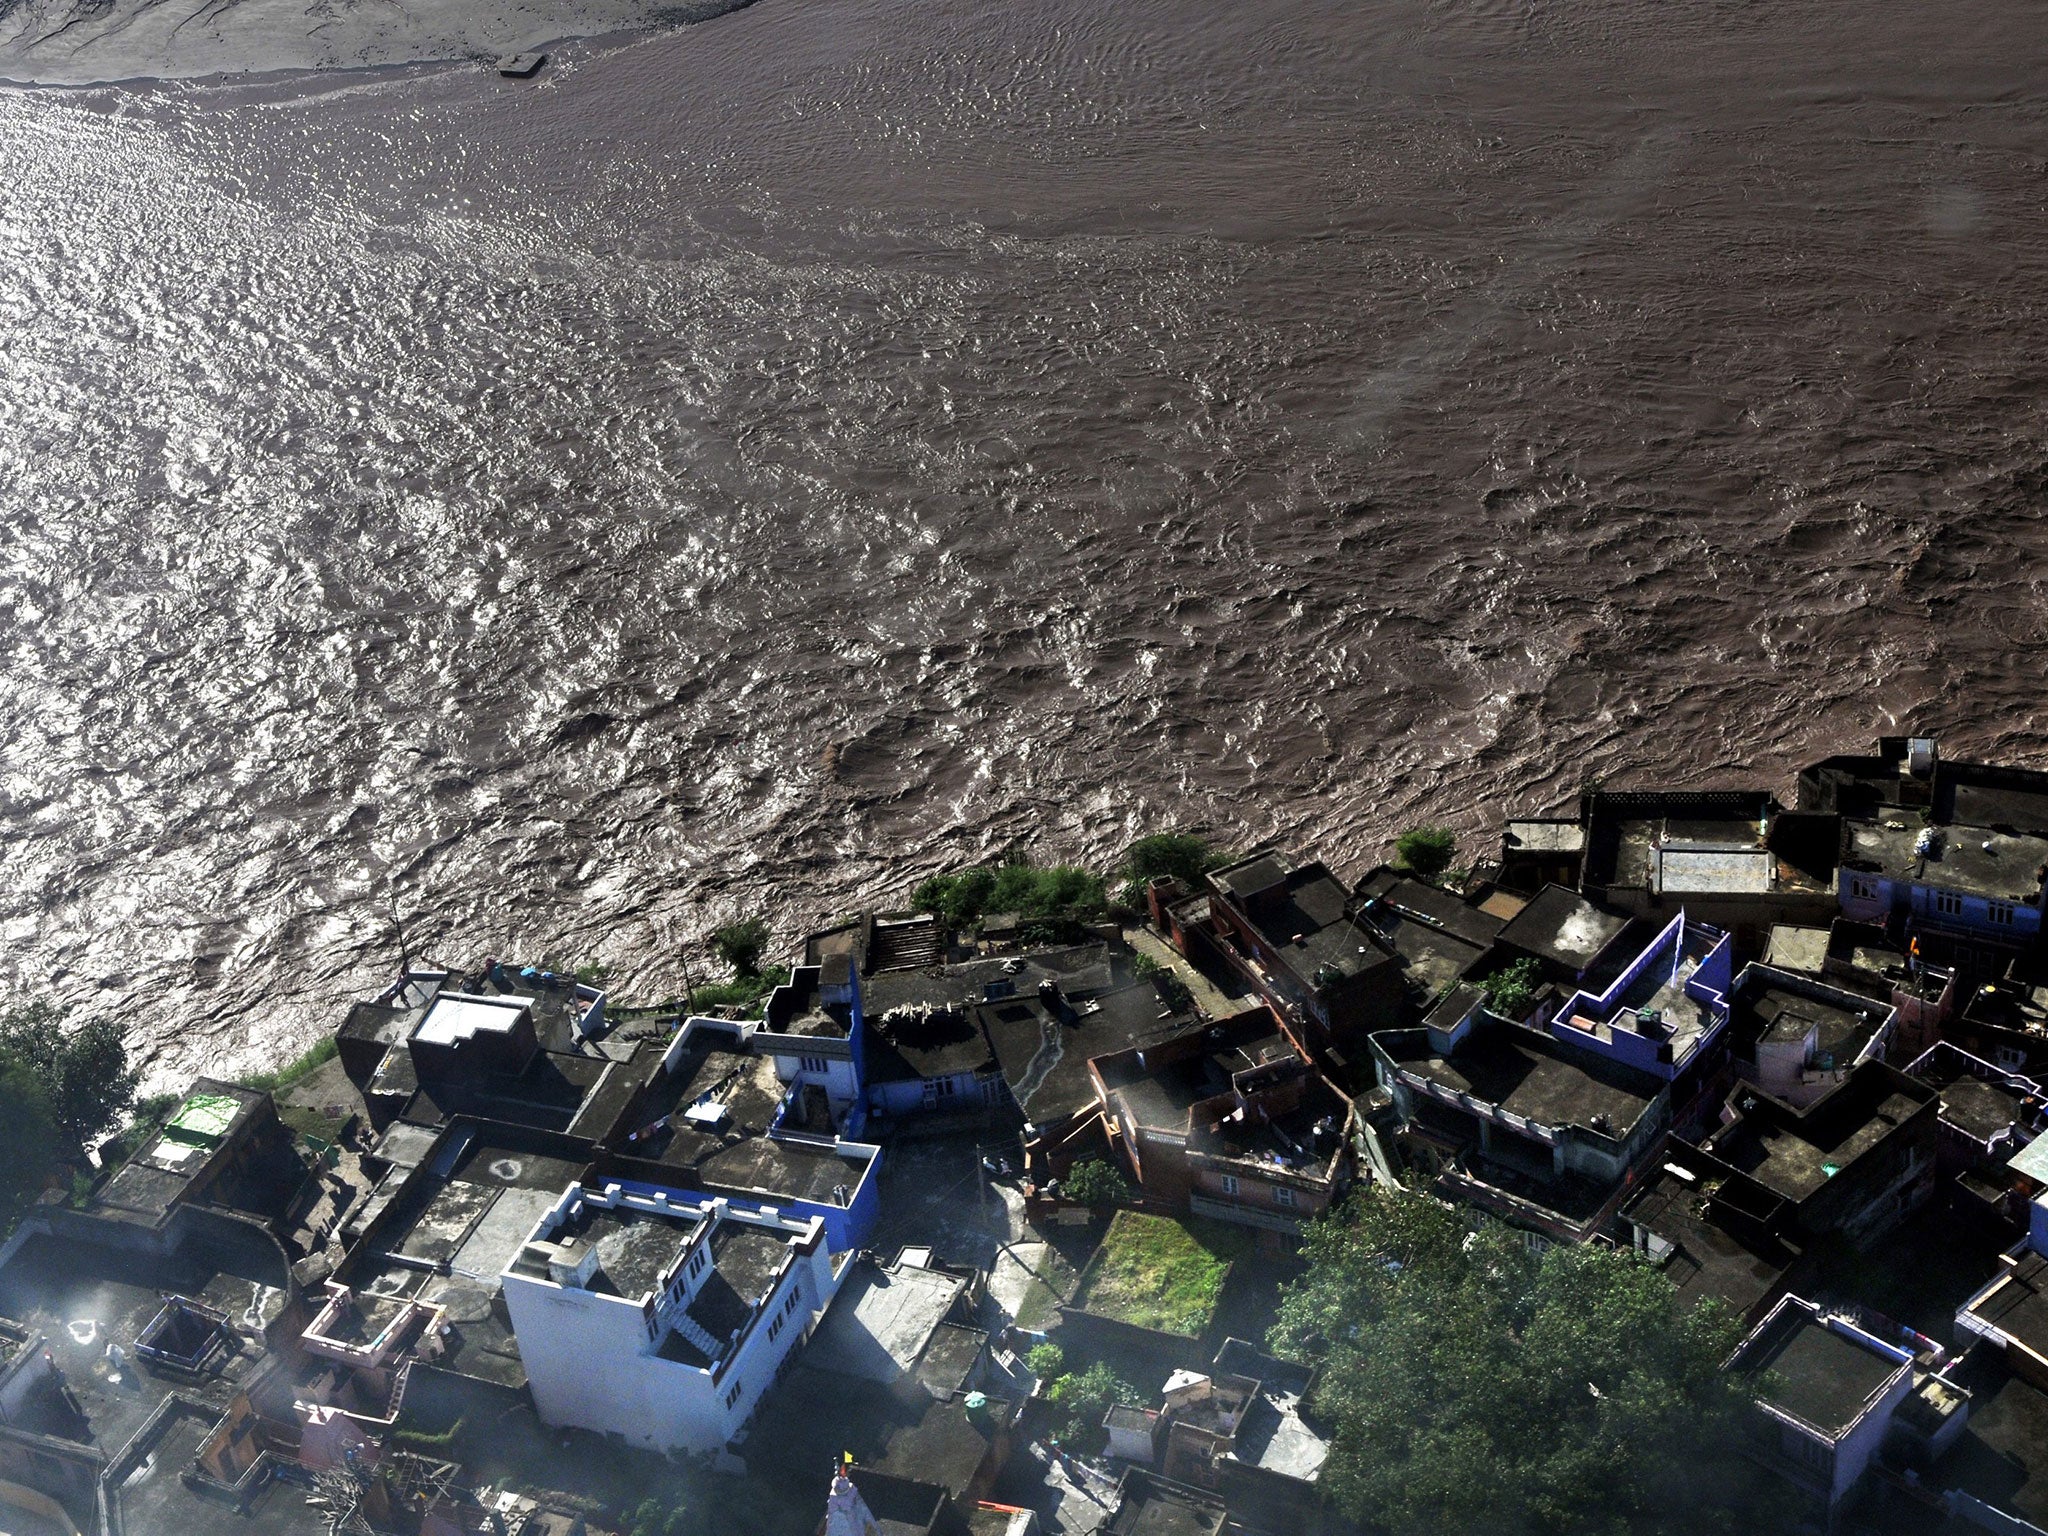 An aerial view of the flood hit area in Pargawal village of Akhnoor sector in Jammu the winter capital of Kashmir, India